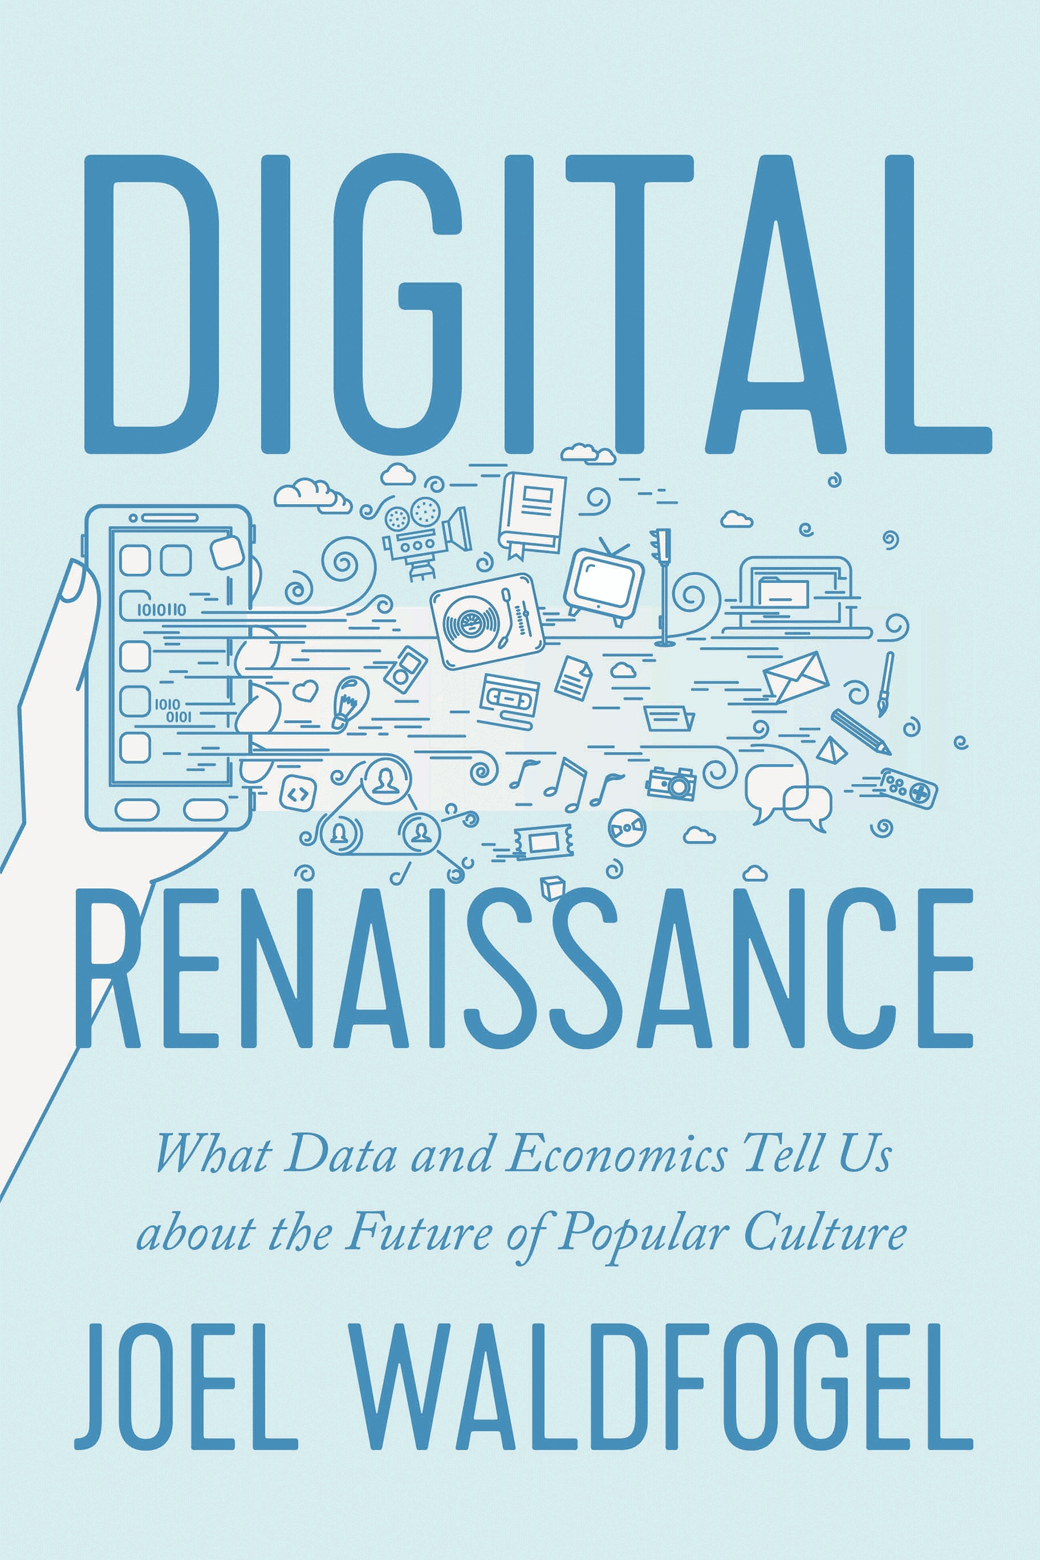 Book cover of Digital Renaissance: What Data and Economics Tell Us About the Future of Popular Culture.